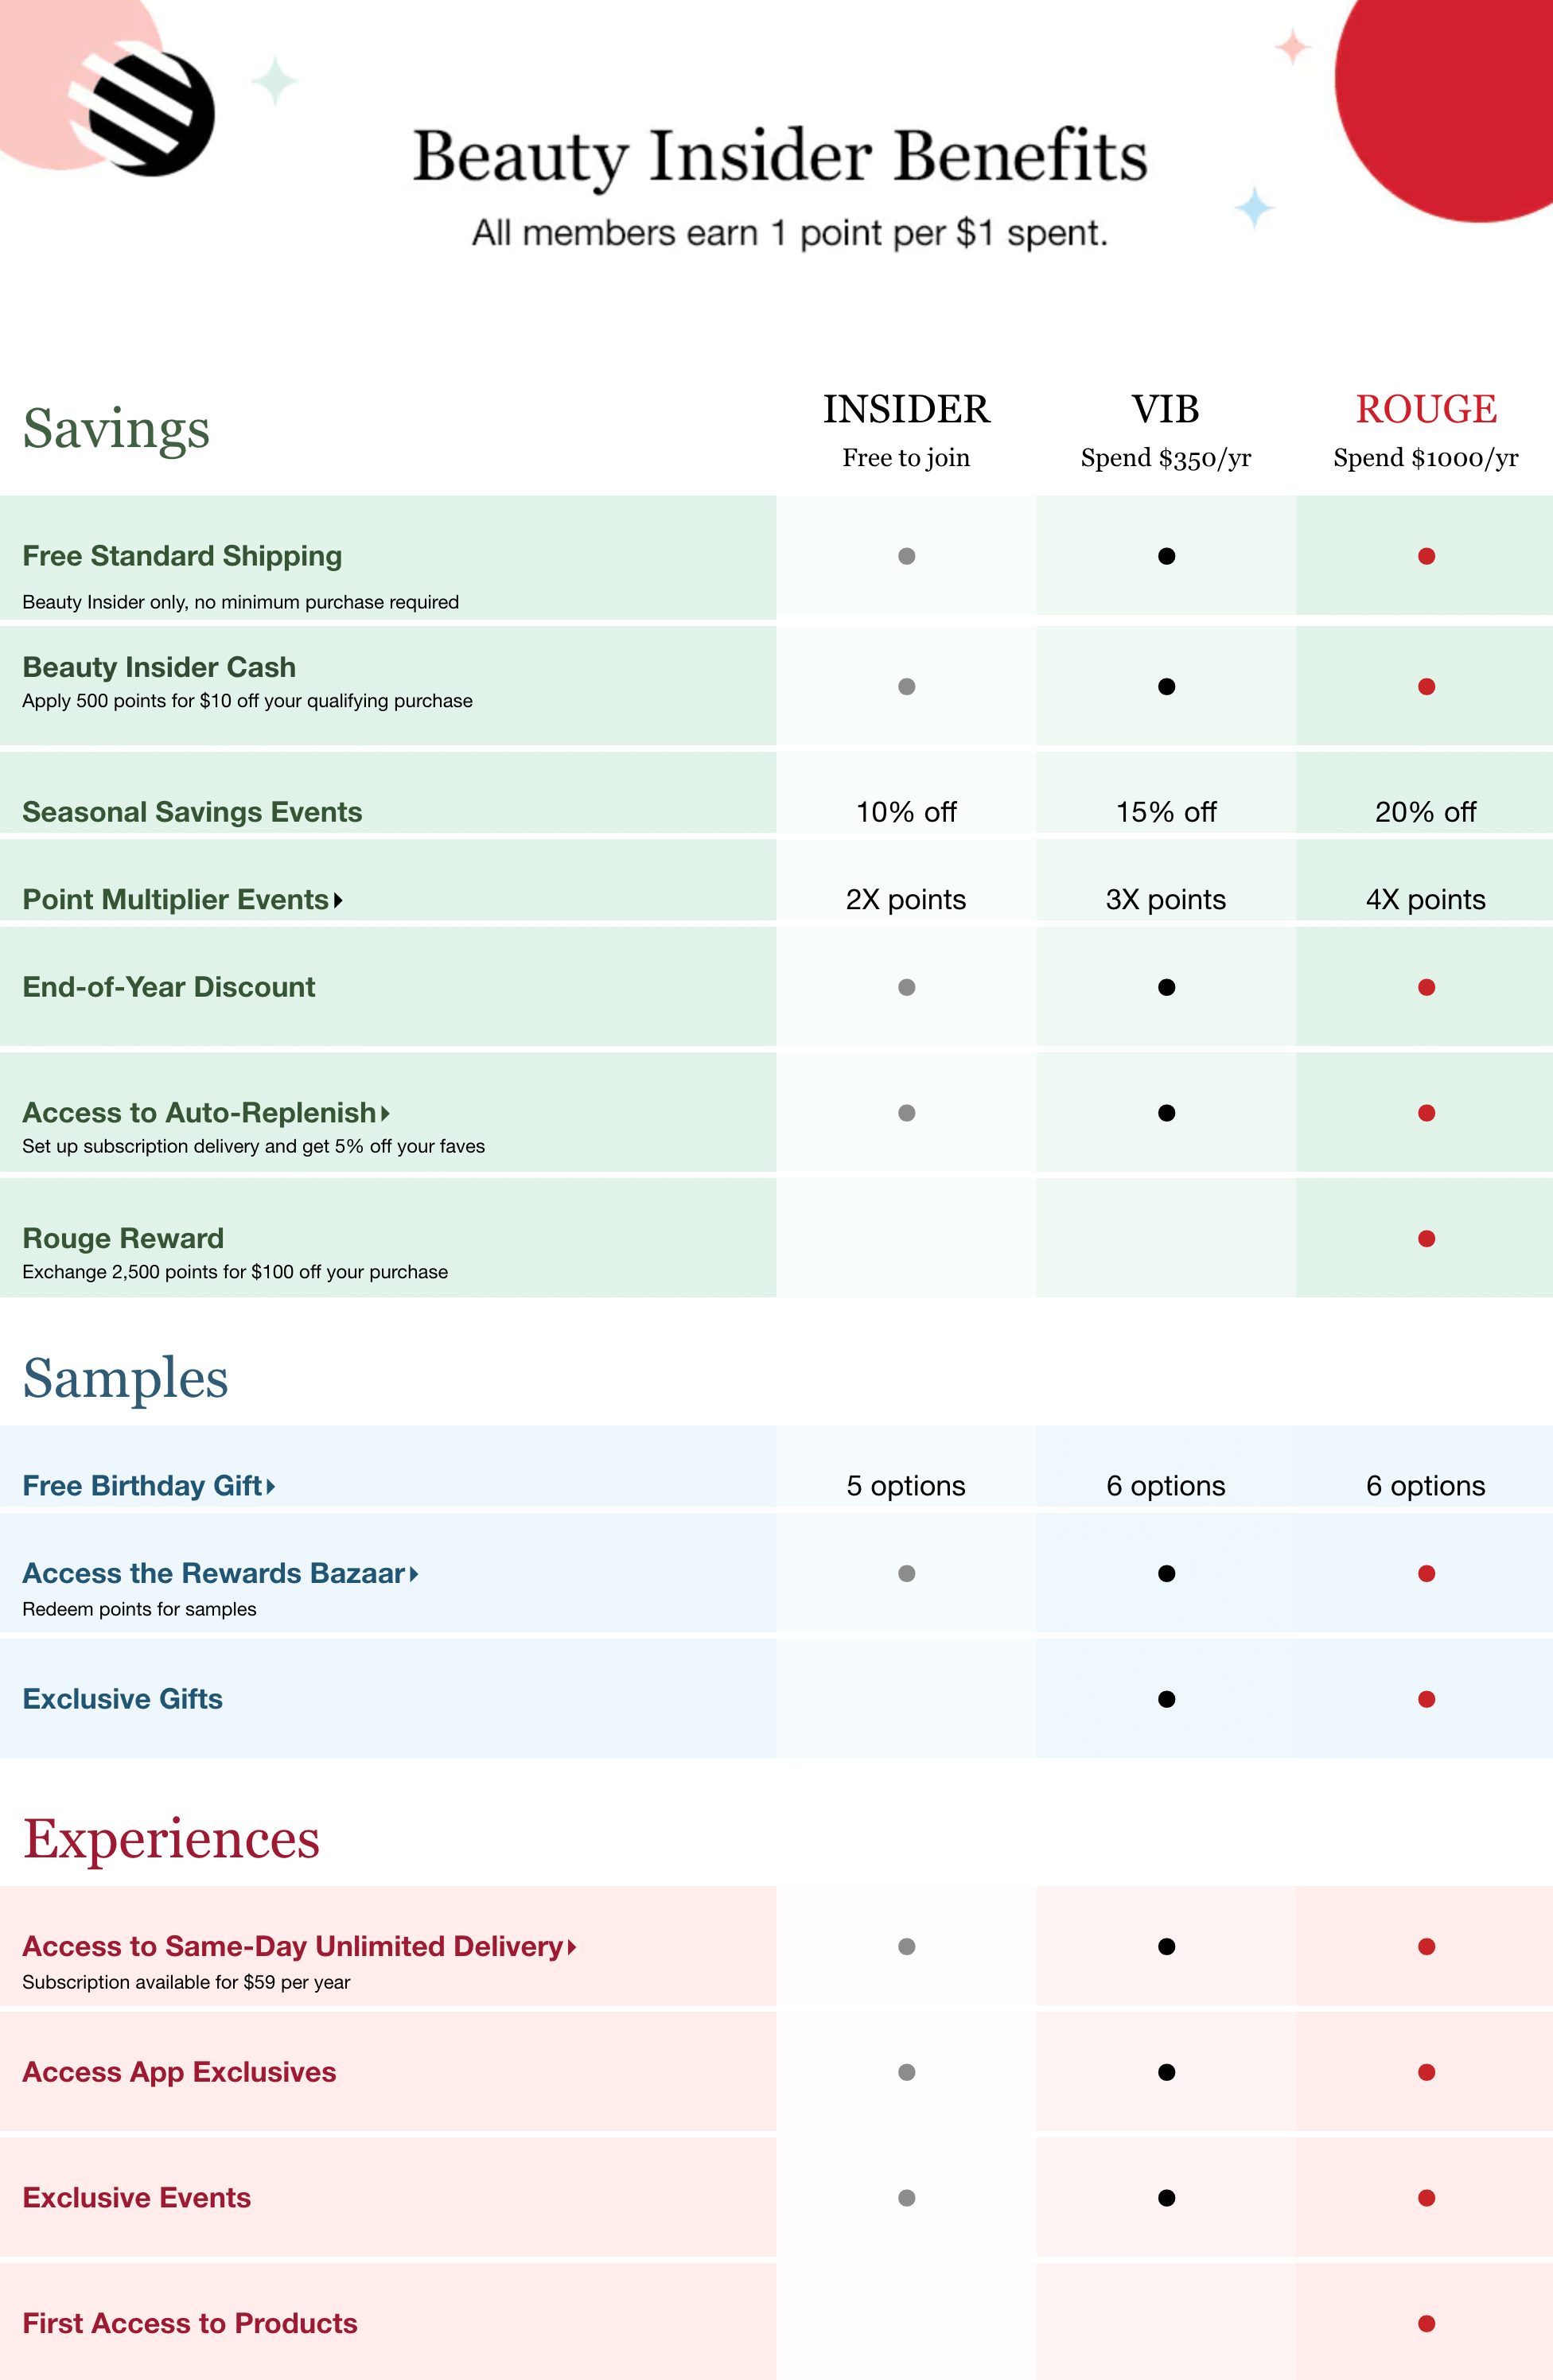 A screenshot from Sephora’s rewards explainer page showing a chart listing the benefits of each VIP tier–Insider, VIB, and Rouge. The rewards are separated into 3 categories–Savings, Samples, and Experiences.